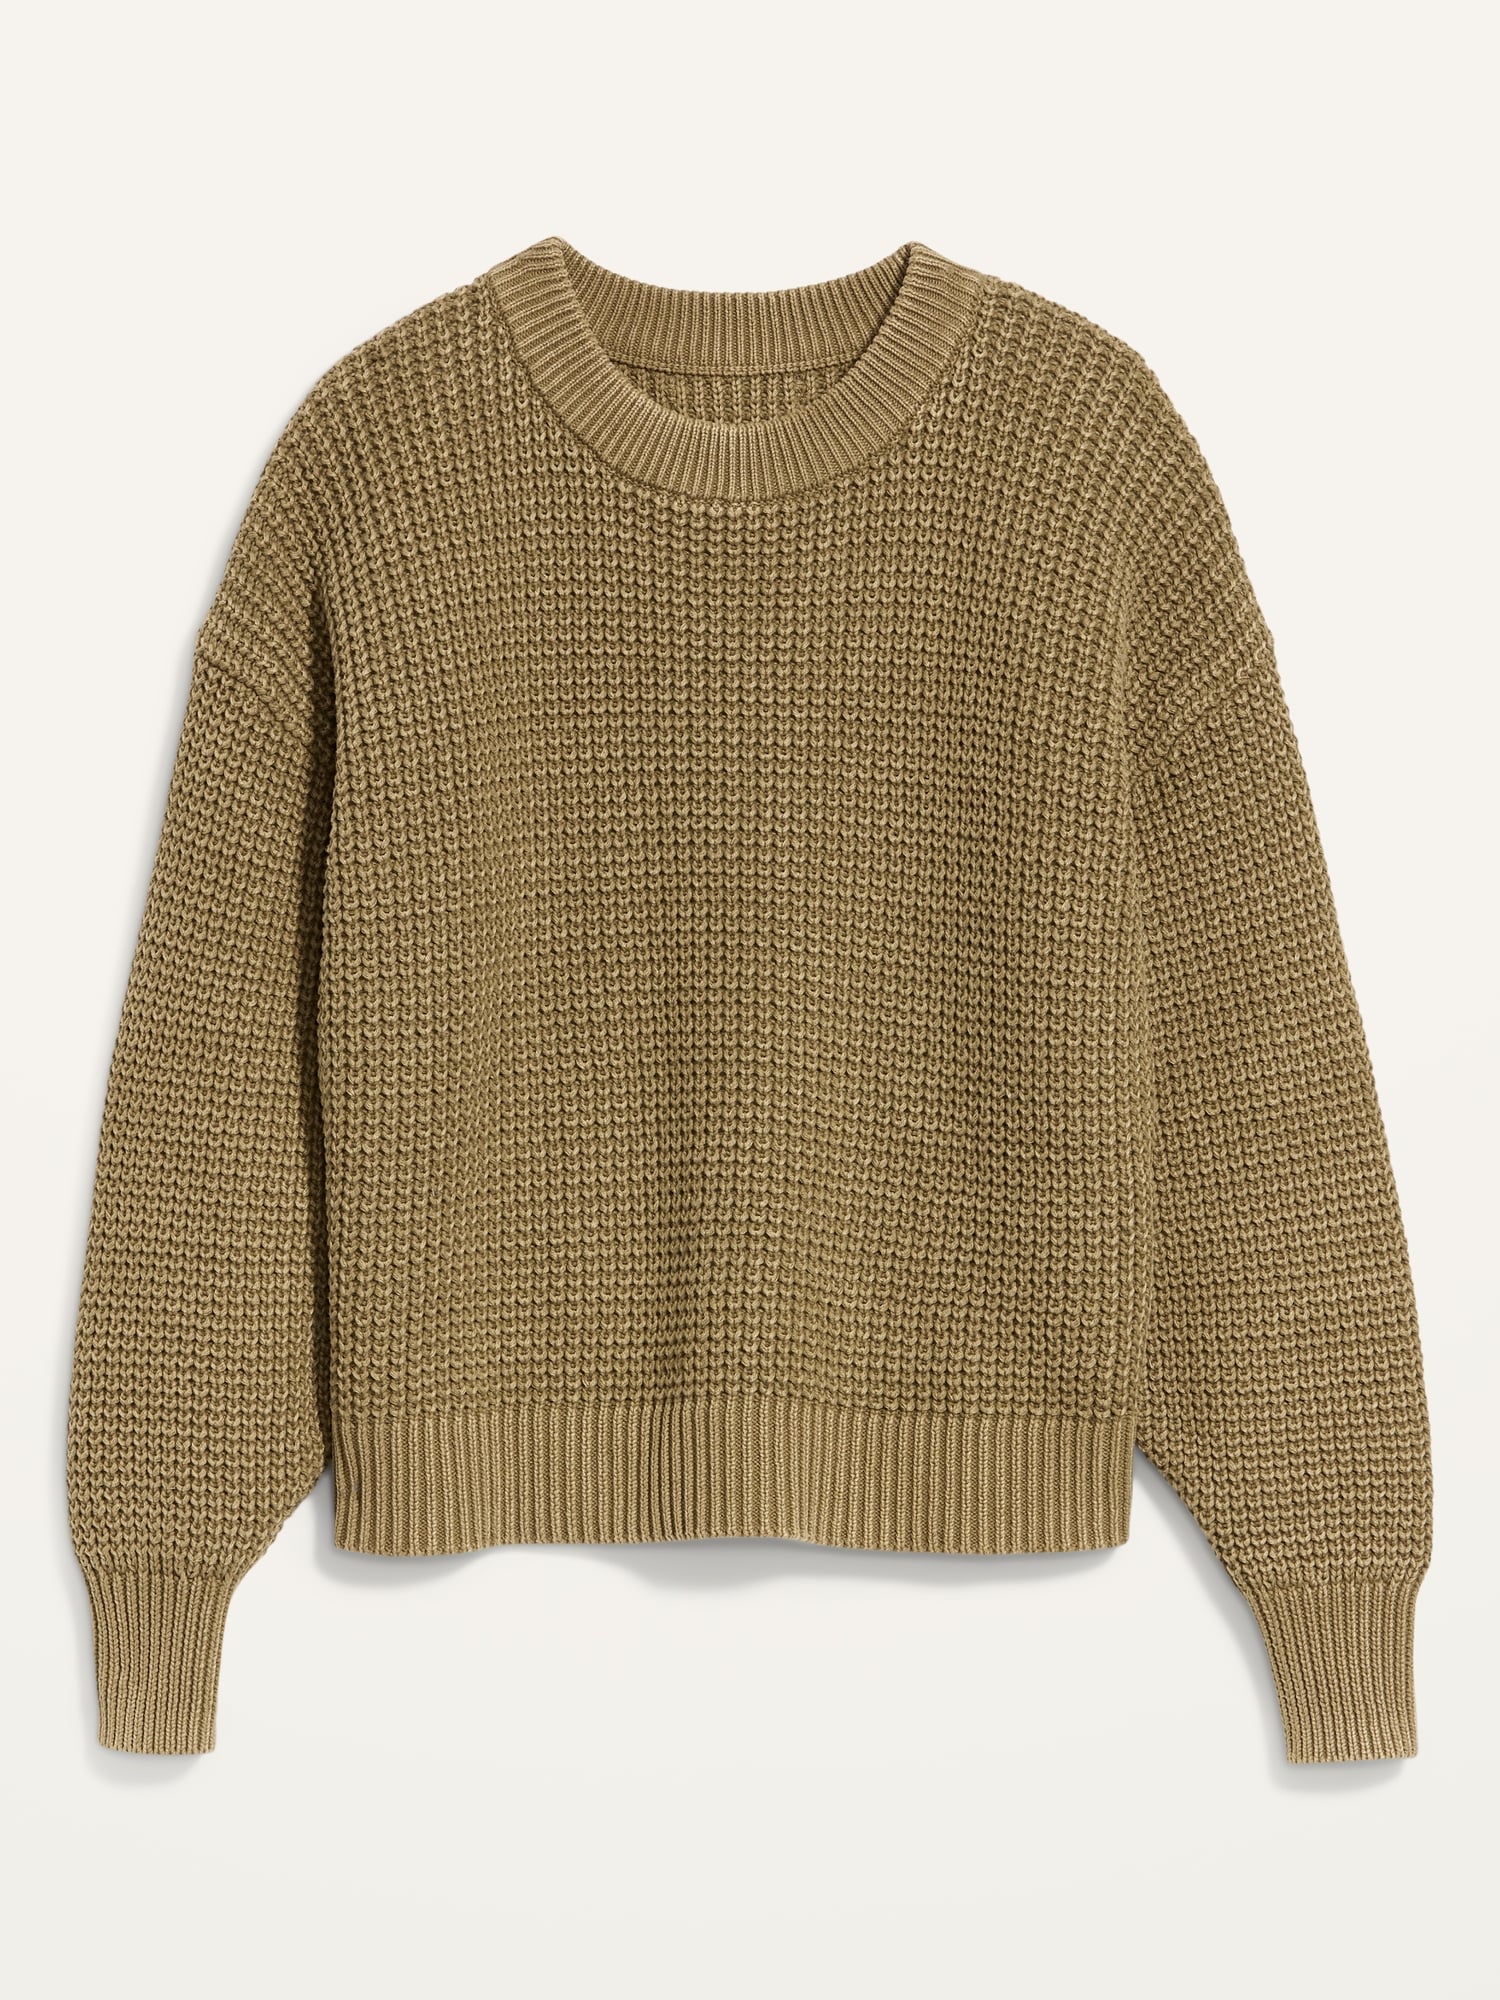 Acid-Wash Shaker-Stitch Sweater for Women | Old Navy